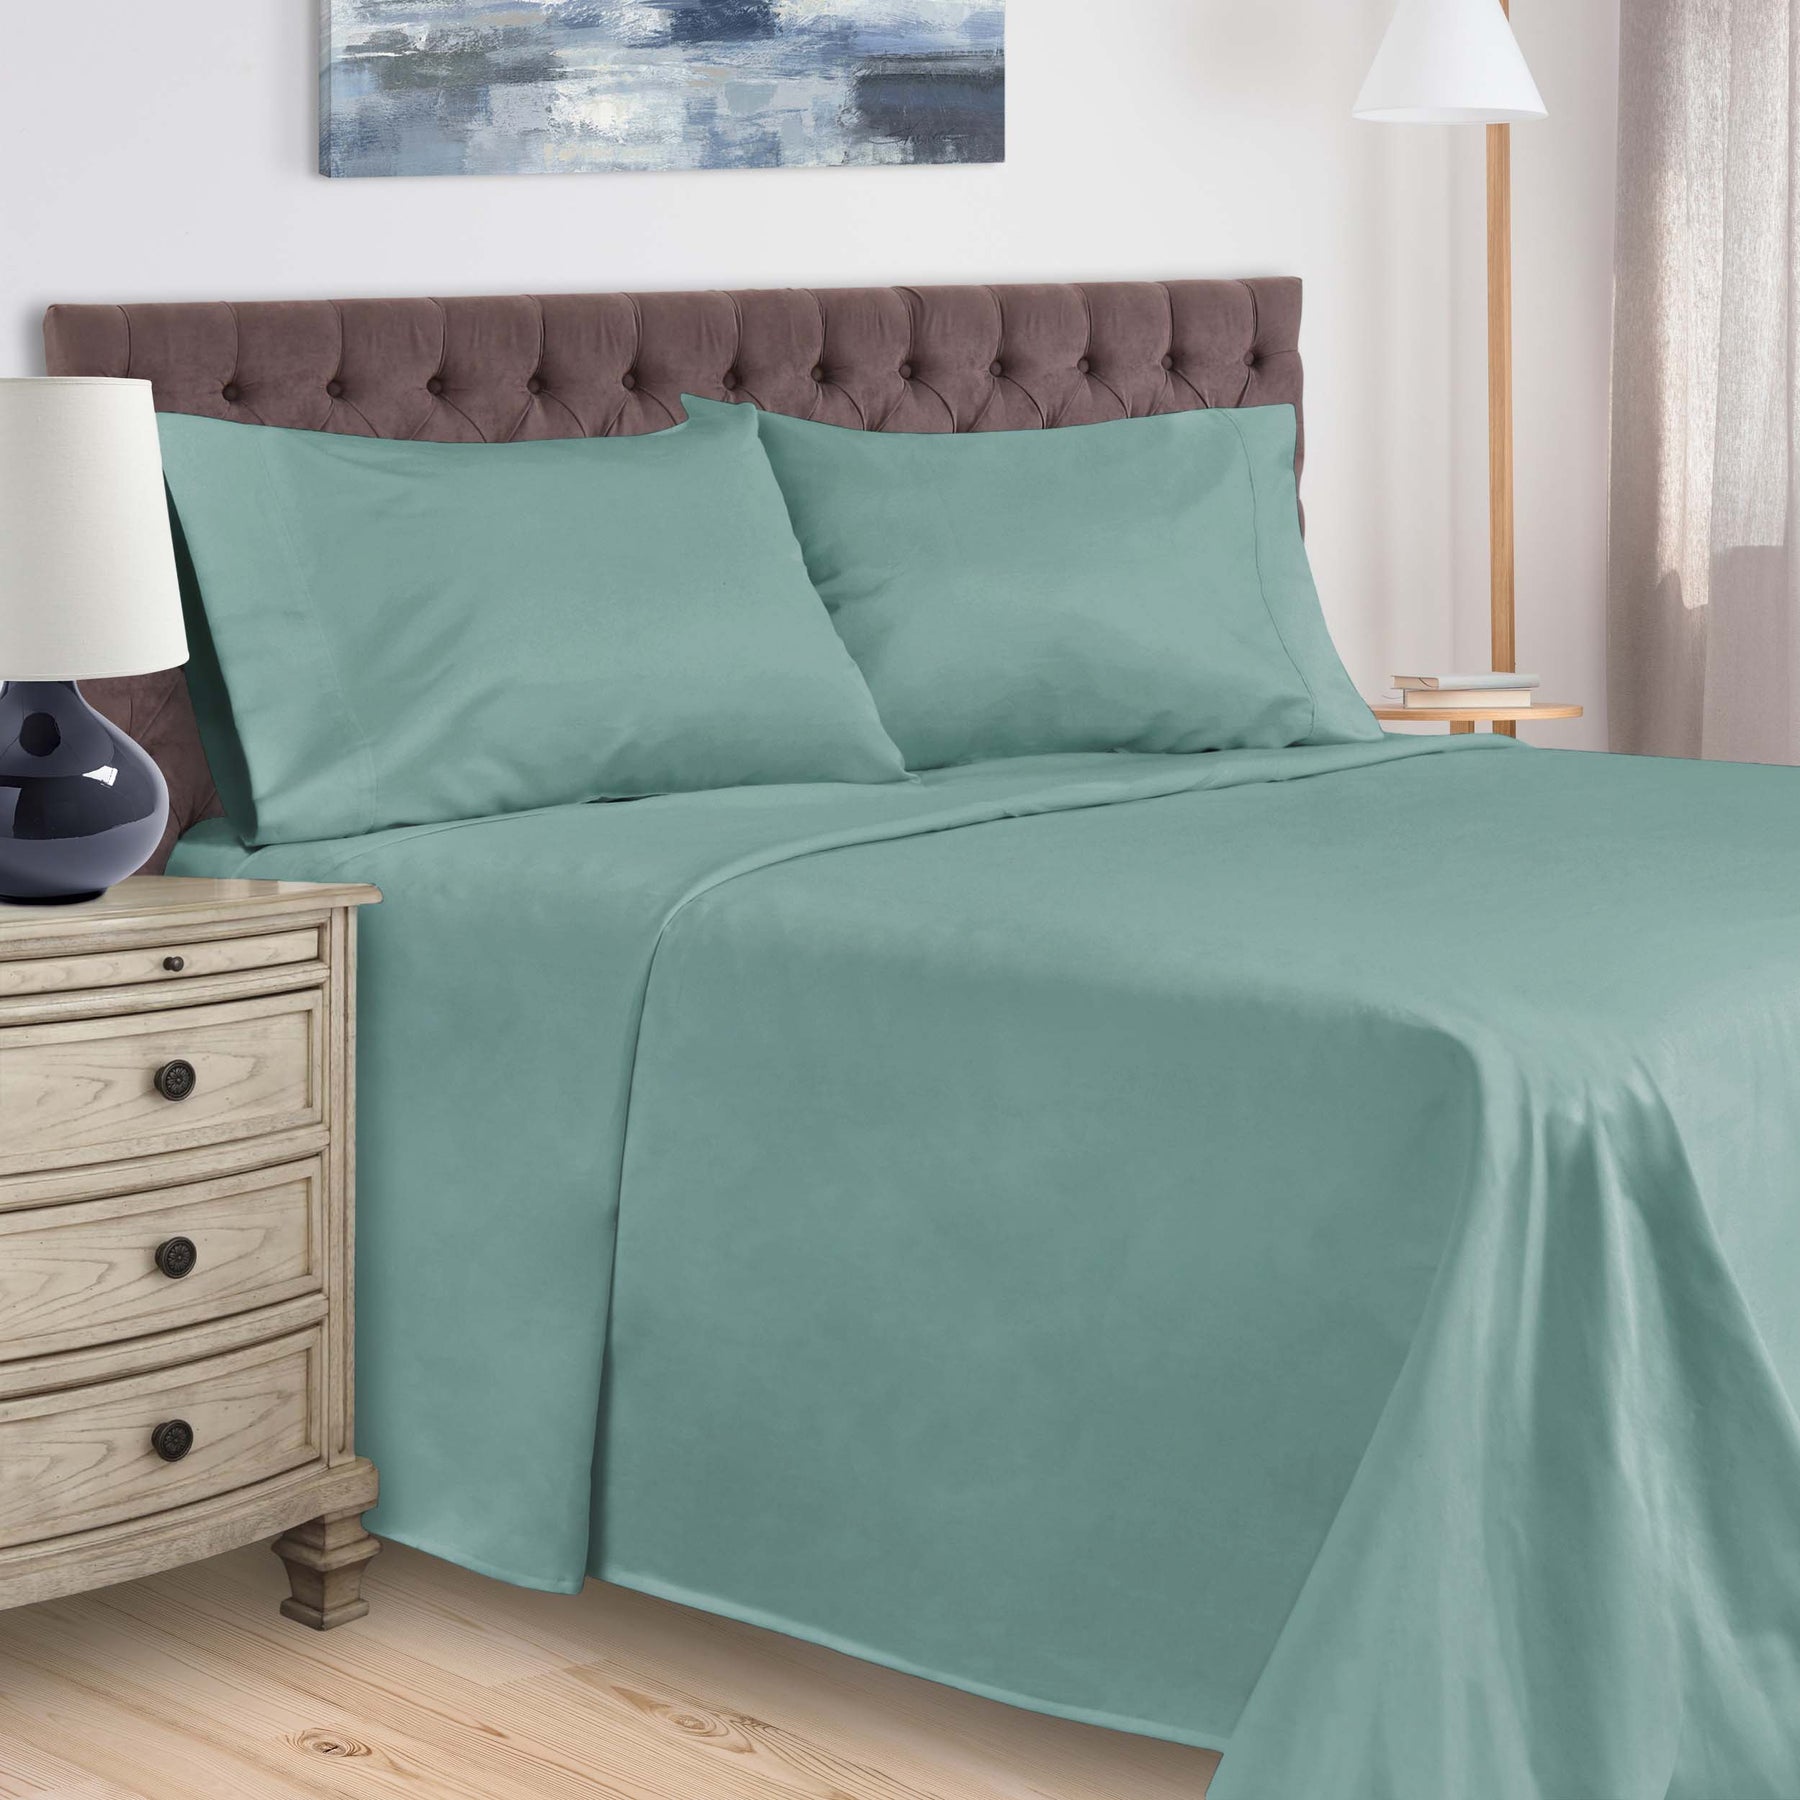 400 Thread Count Egyptian Cotton Solid Deep Pocket Sheet Set - Teal